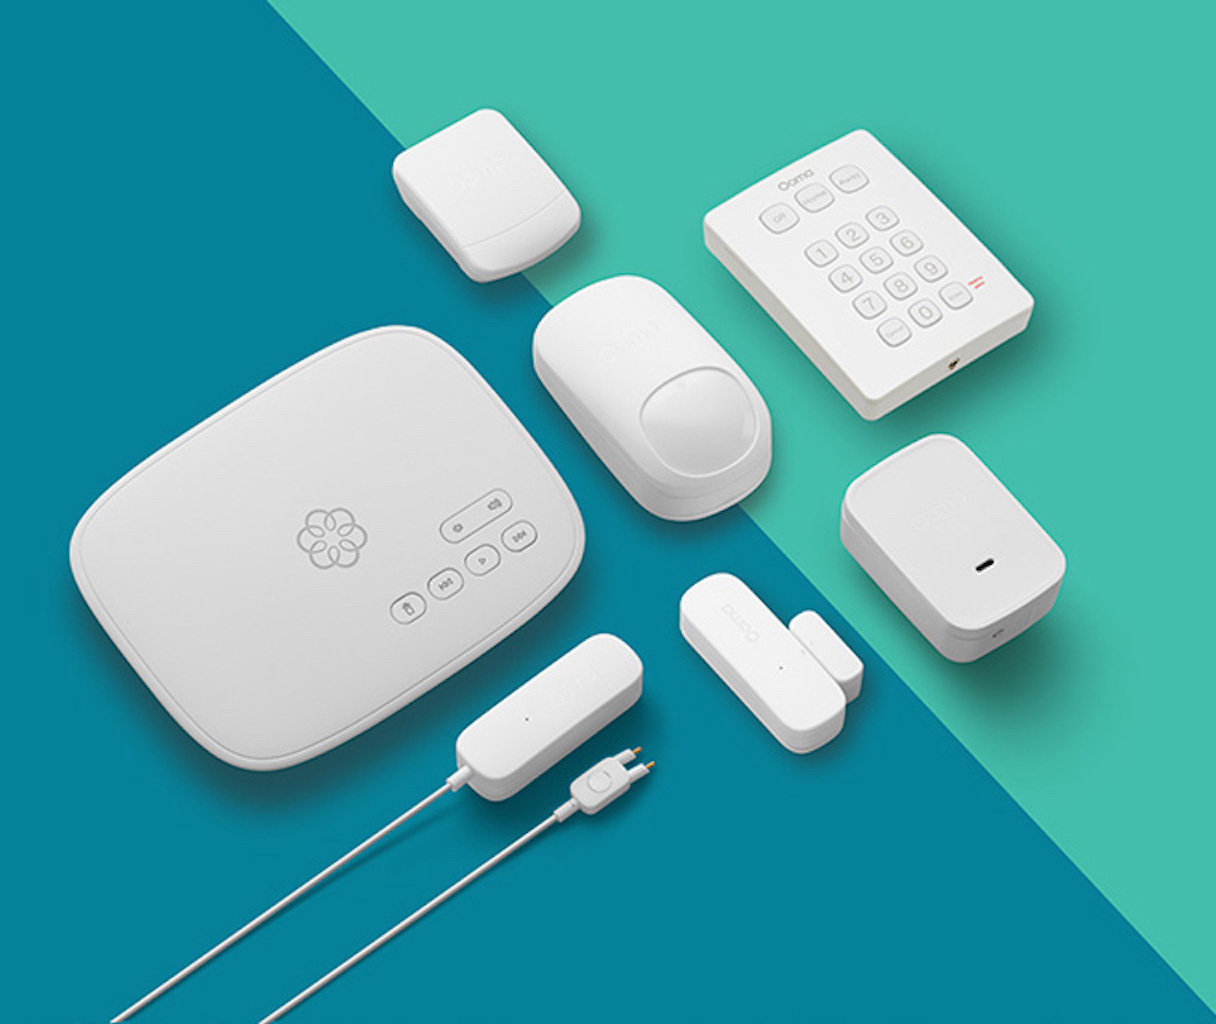 Ooma Improves on Phone and Home Security with New Products for Cord Cutters